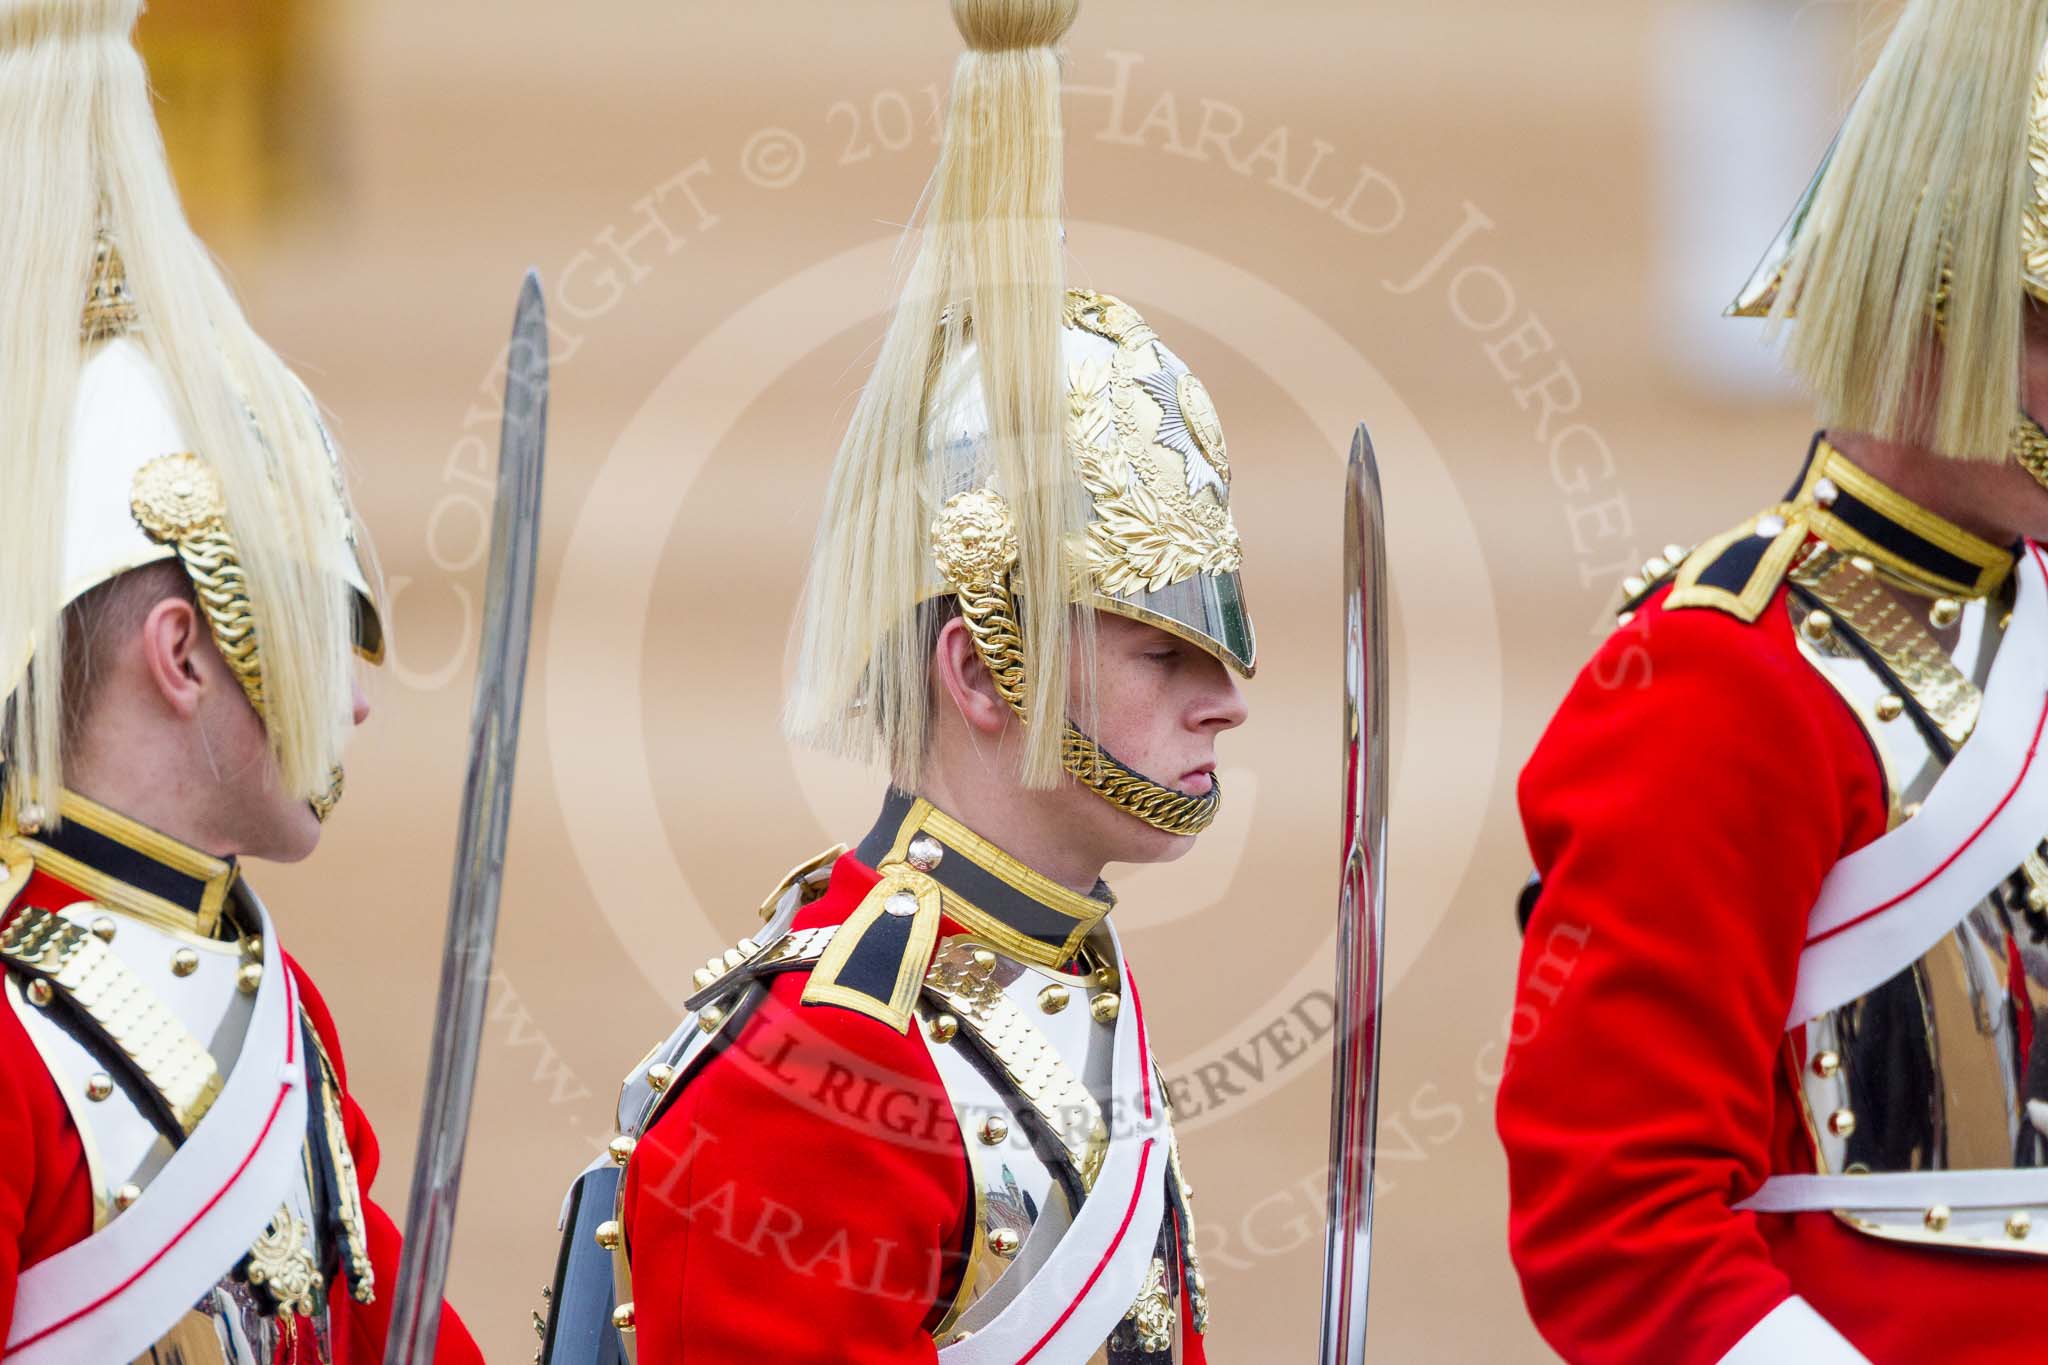 Trooping the Colour 2015. Image #236, 13 June 2015 10:58 Horse Guards Parade, London, UK